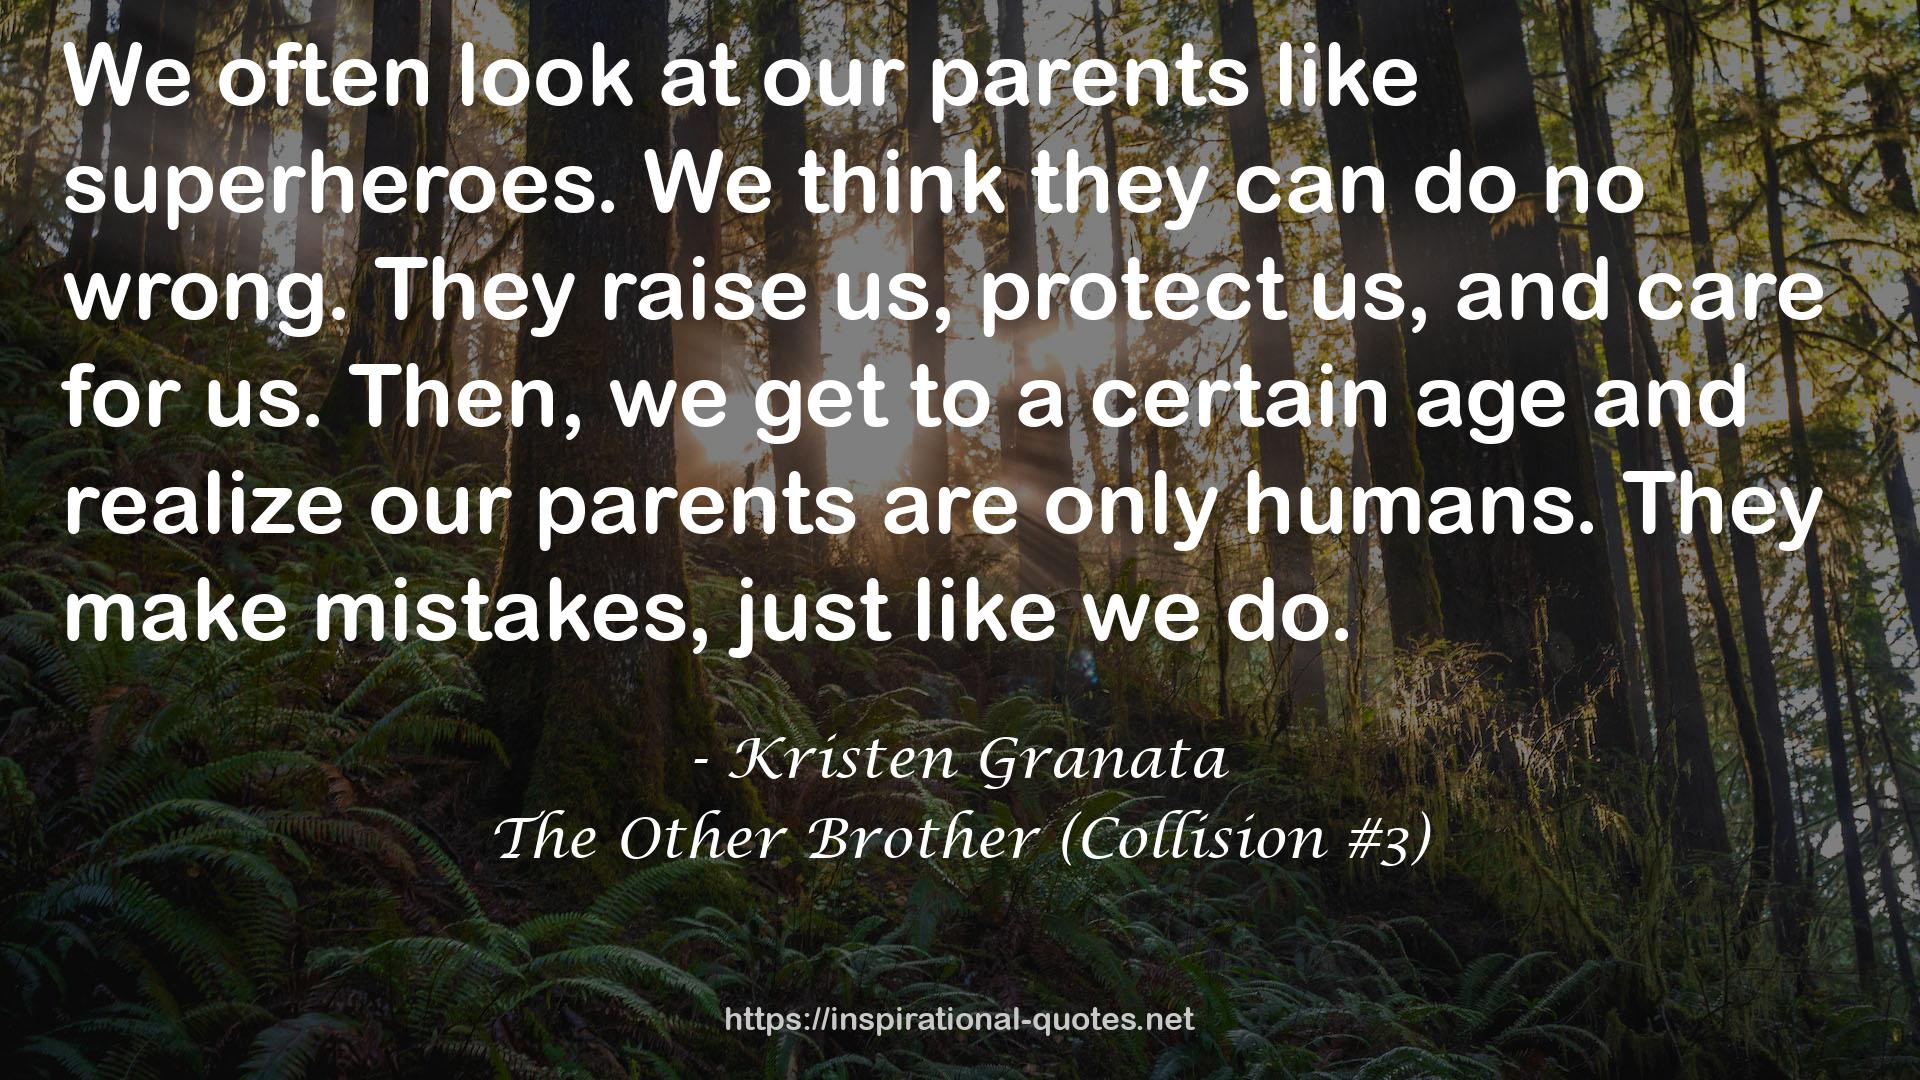 The Other Brother (Collision #3) QUOTES